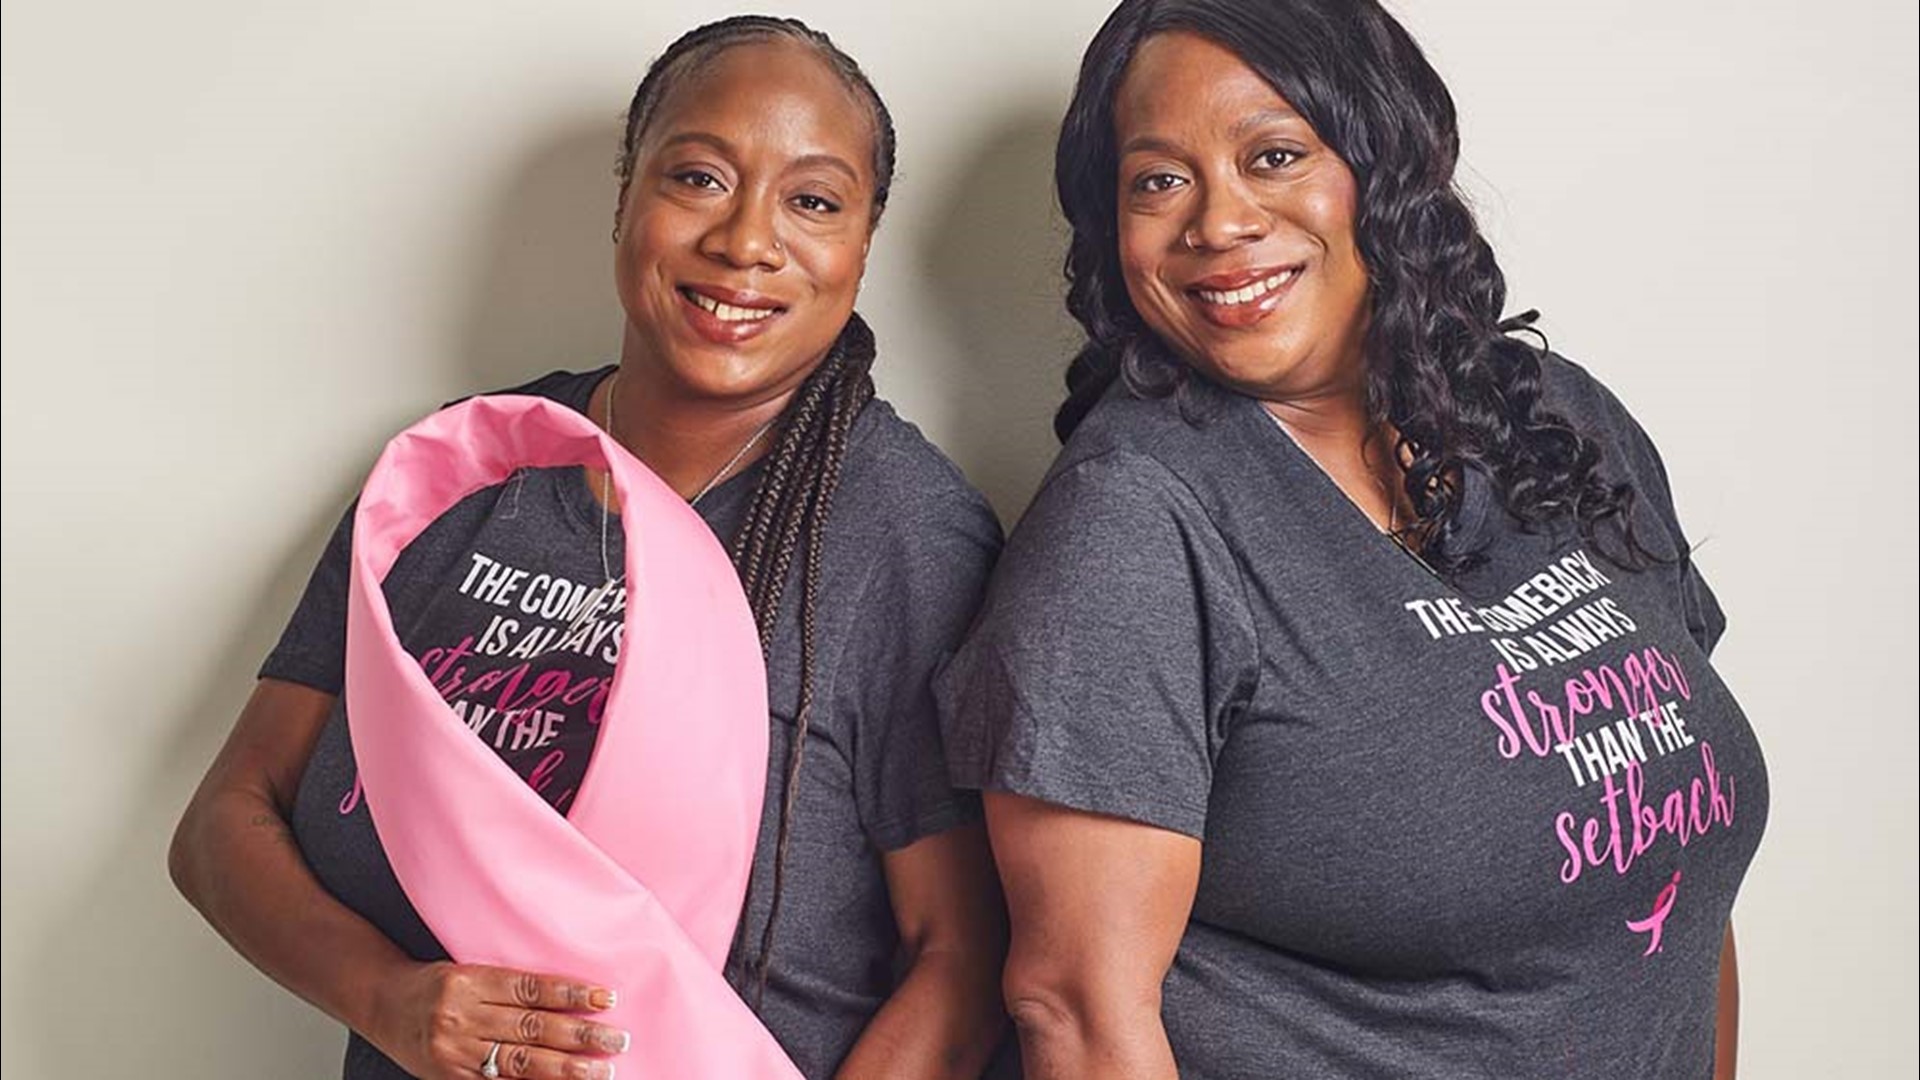 Vamekia and Vatrecia Gayfield share their story of hope and healing after battling breast cancer together.